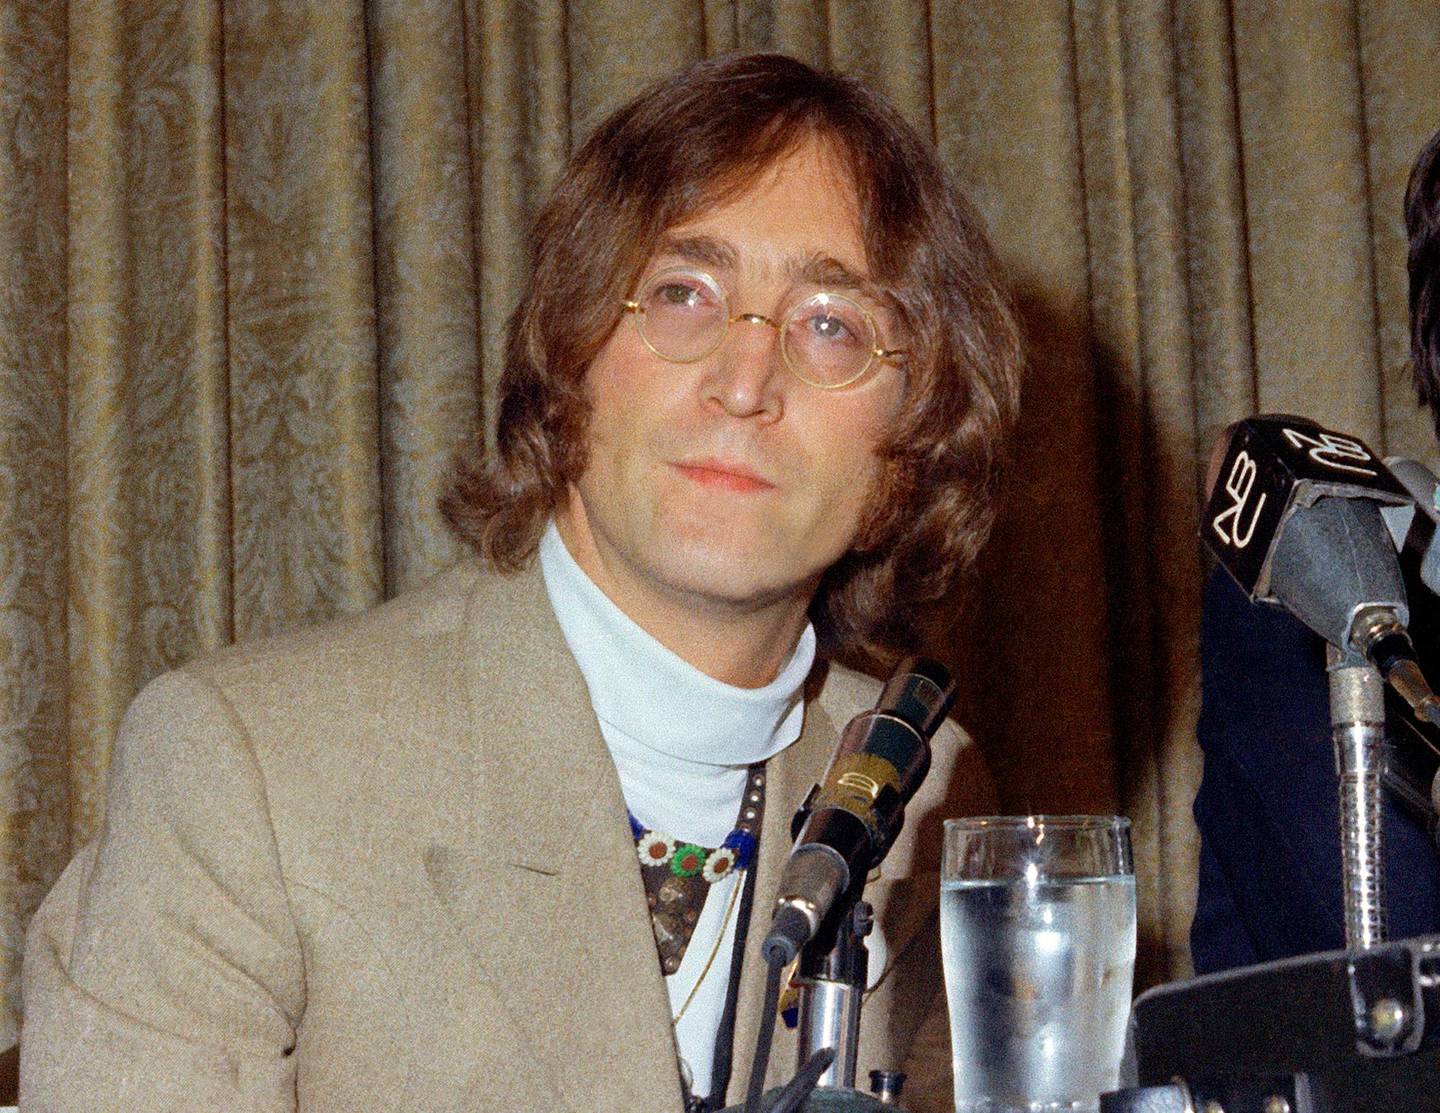 FILE - In this 1971 file photo, singer John Lennon appears during a press conference. Mark David Chapman, 63, who shot and killed Lennon on Dec. 8, 1980, was denied parole for a tenth time on Thursday, Aug. 23, 2018 by New York's Parole Board. He will be up for parole again in August 2020. (AP Photo, File)